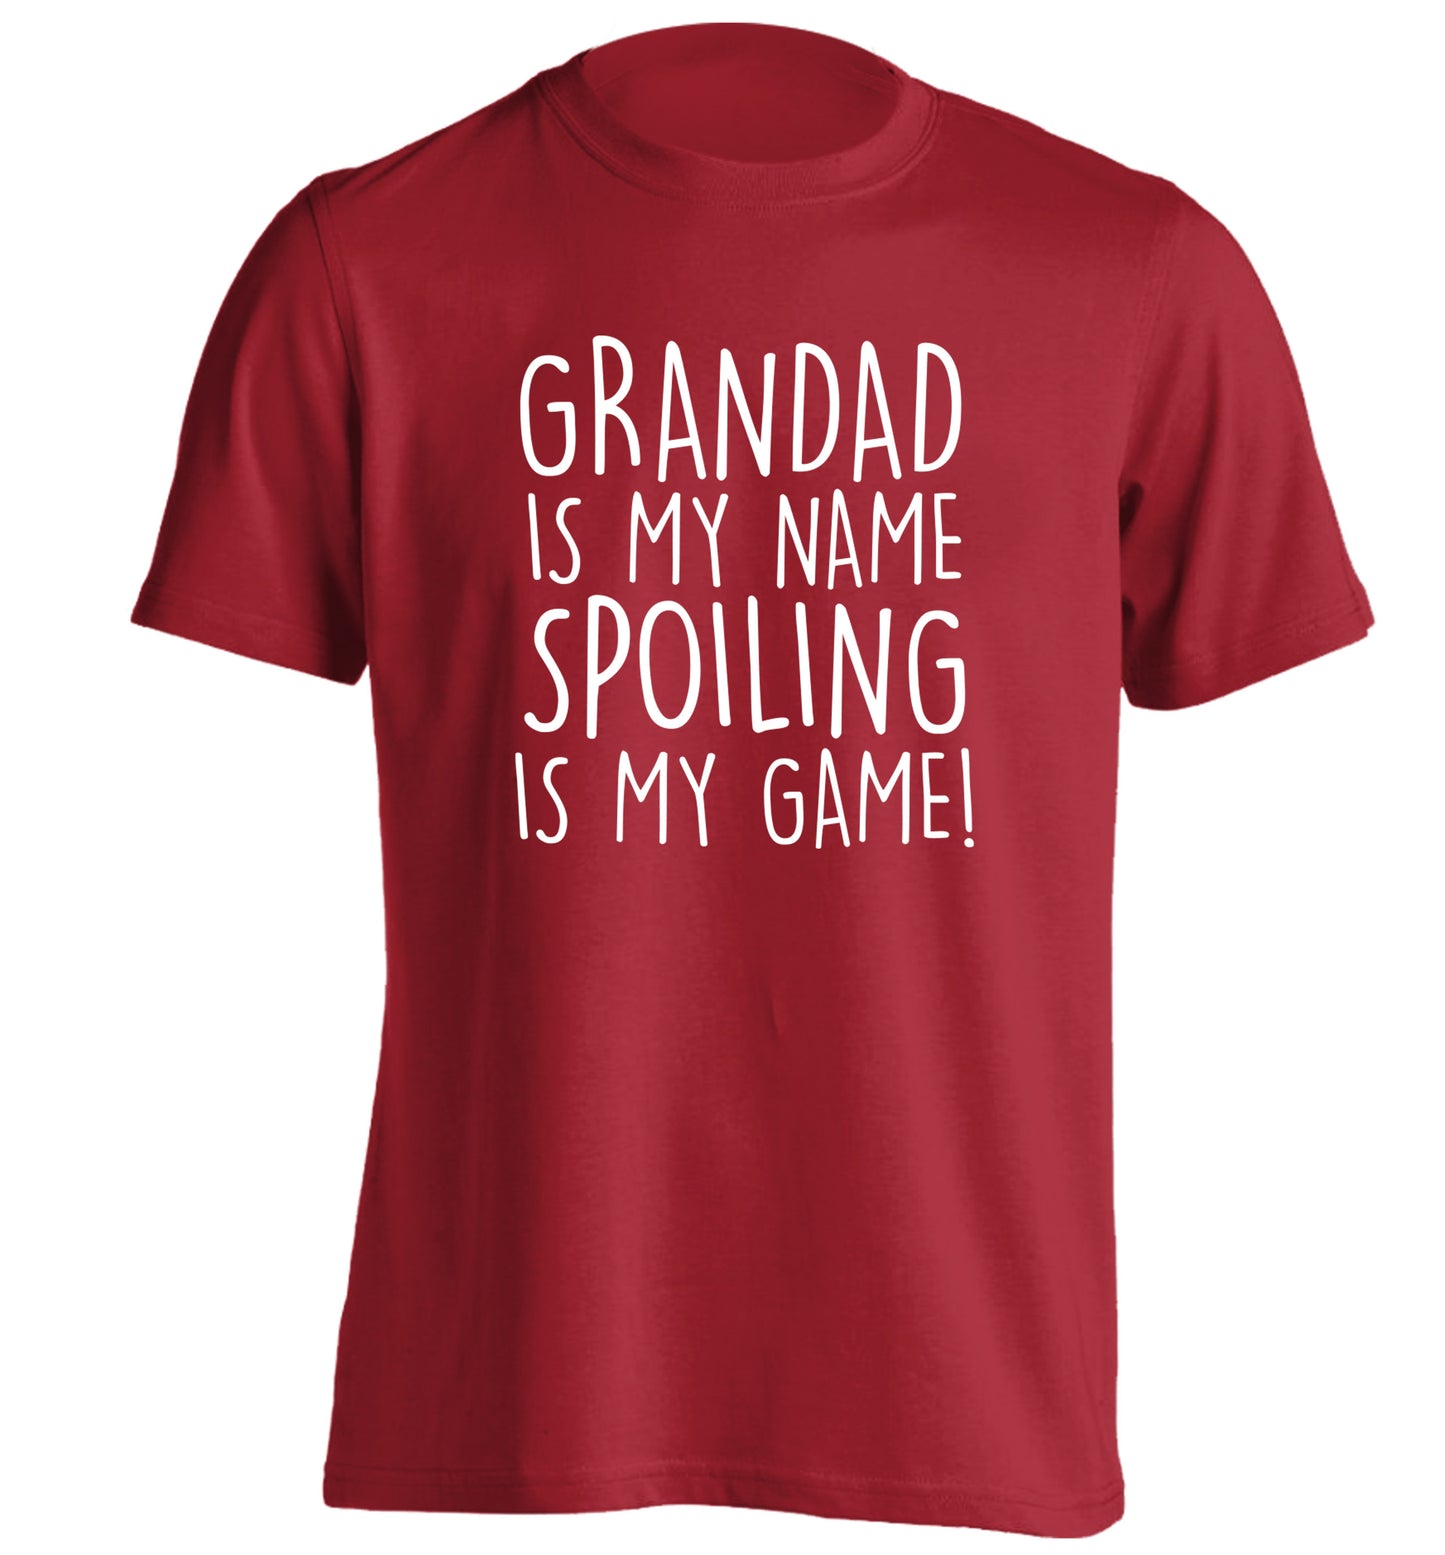 Grandad is my name, spoiling is my game adults unisex red Tshirt 2XL